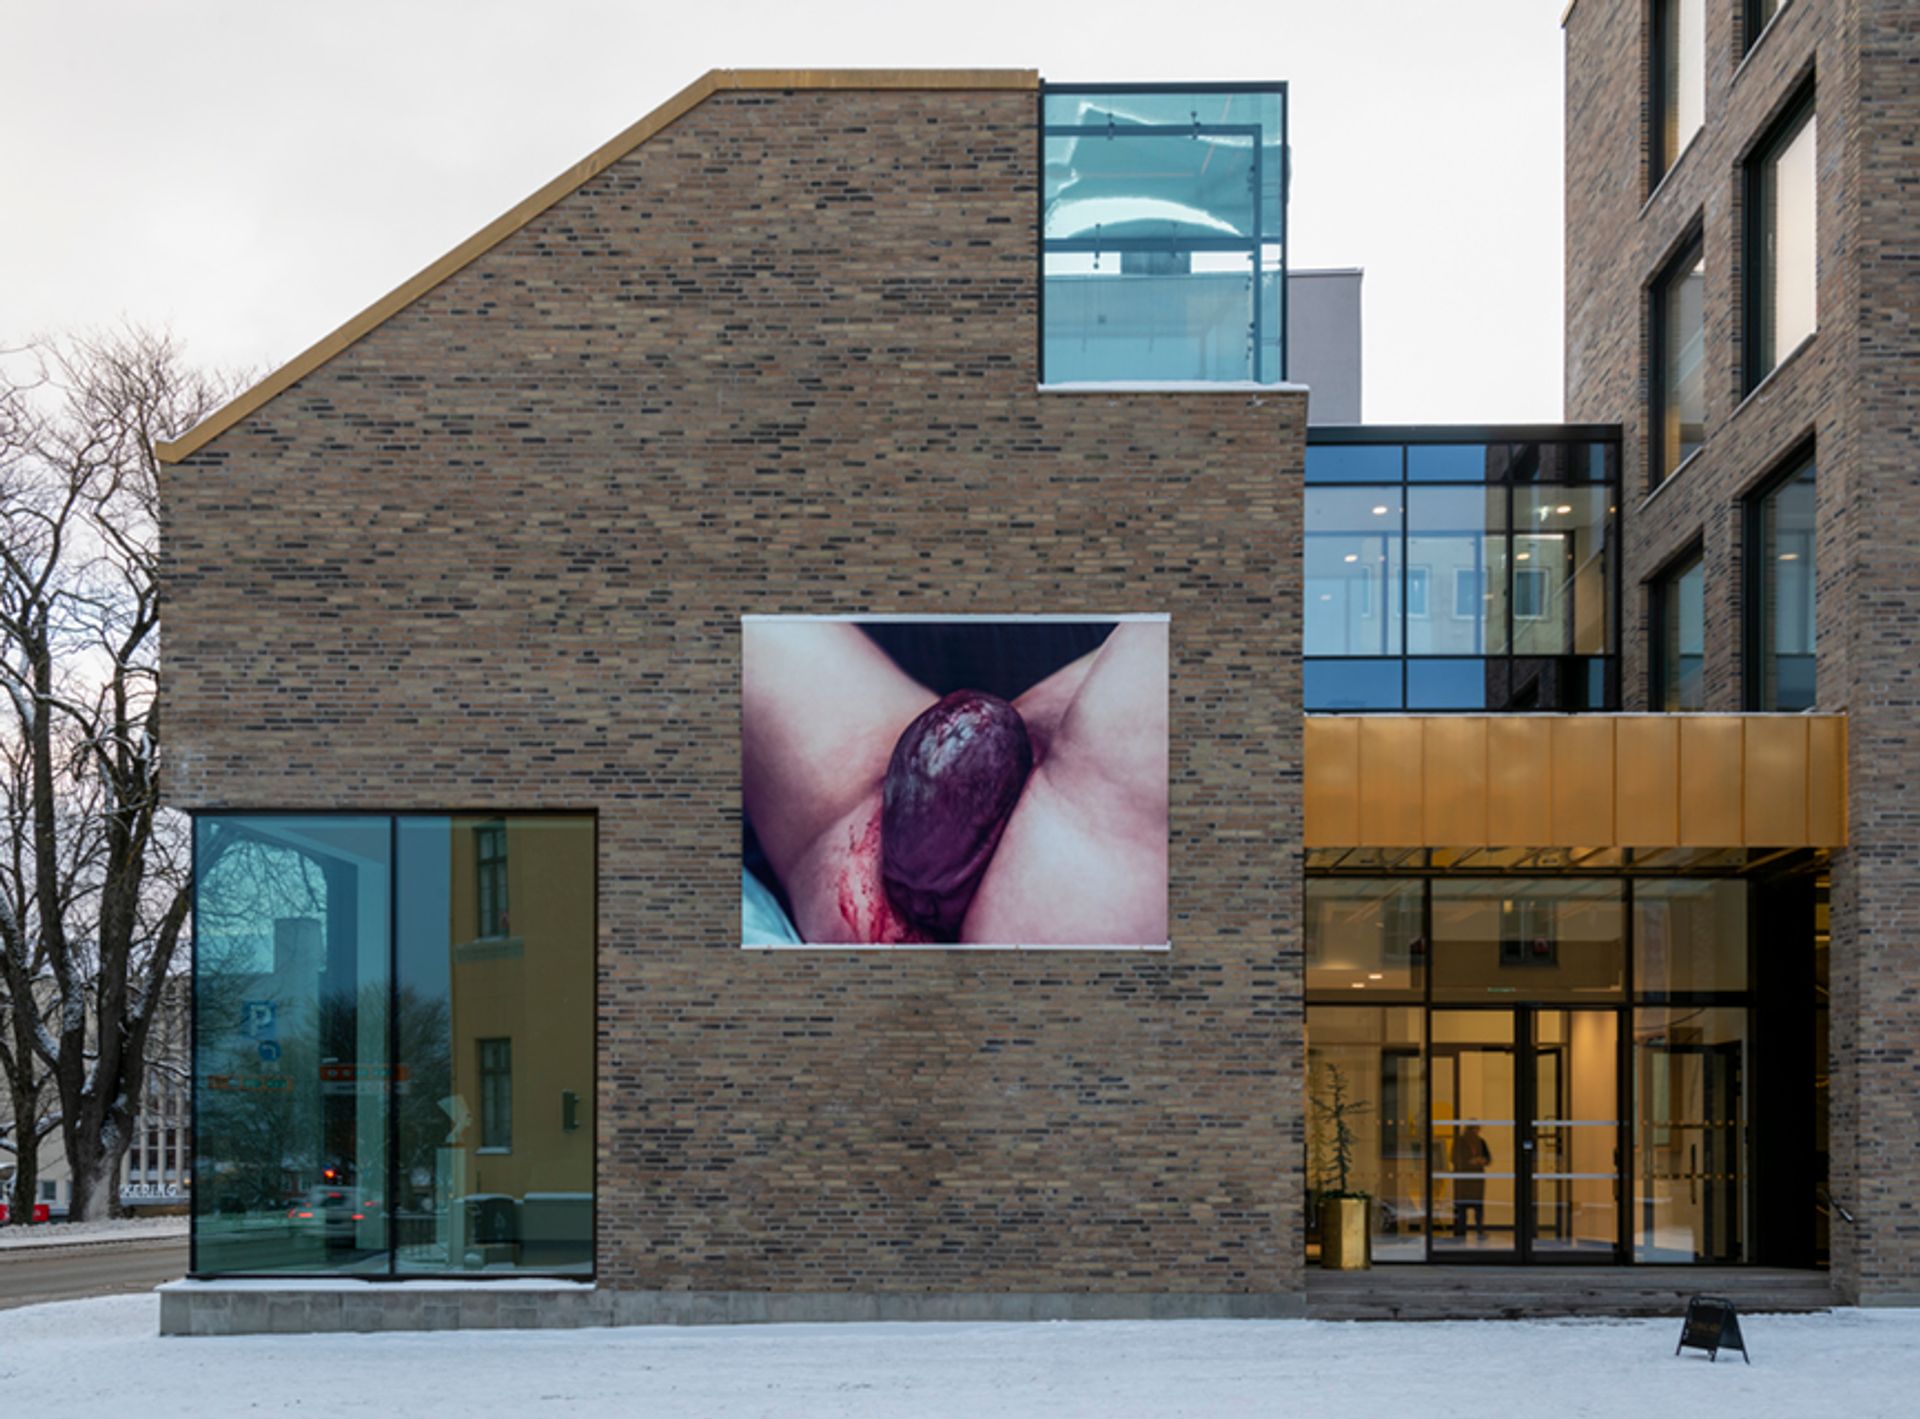 Heji Shin's photo of a crowning baby is featured on the side of the newly opened KUK Trondheim. Courtesy of KUK Trondheim